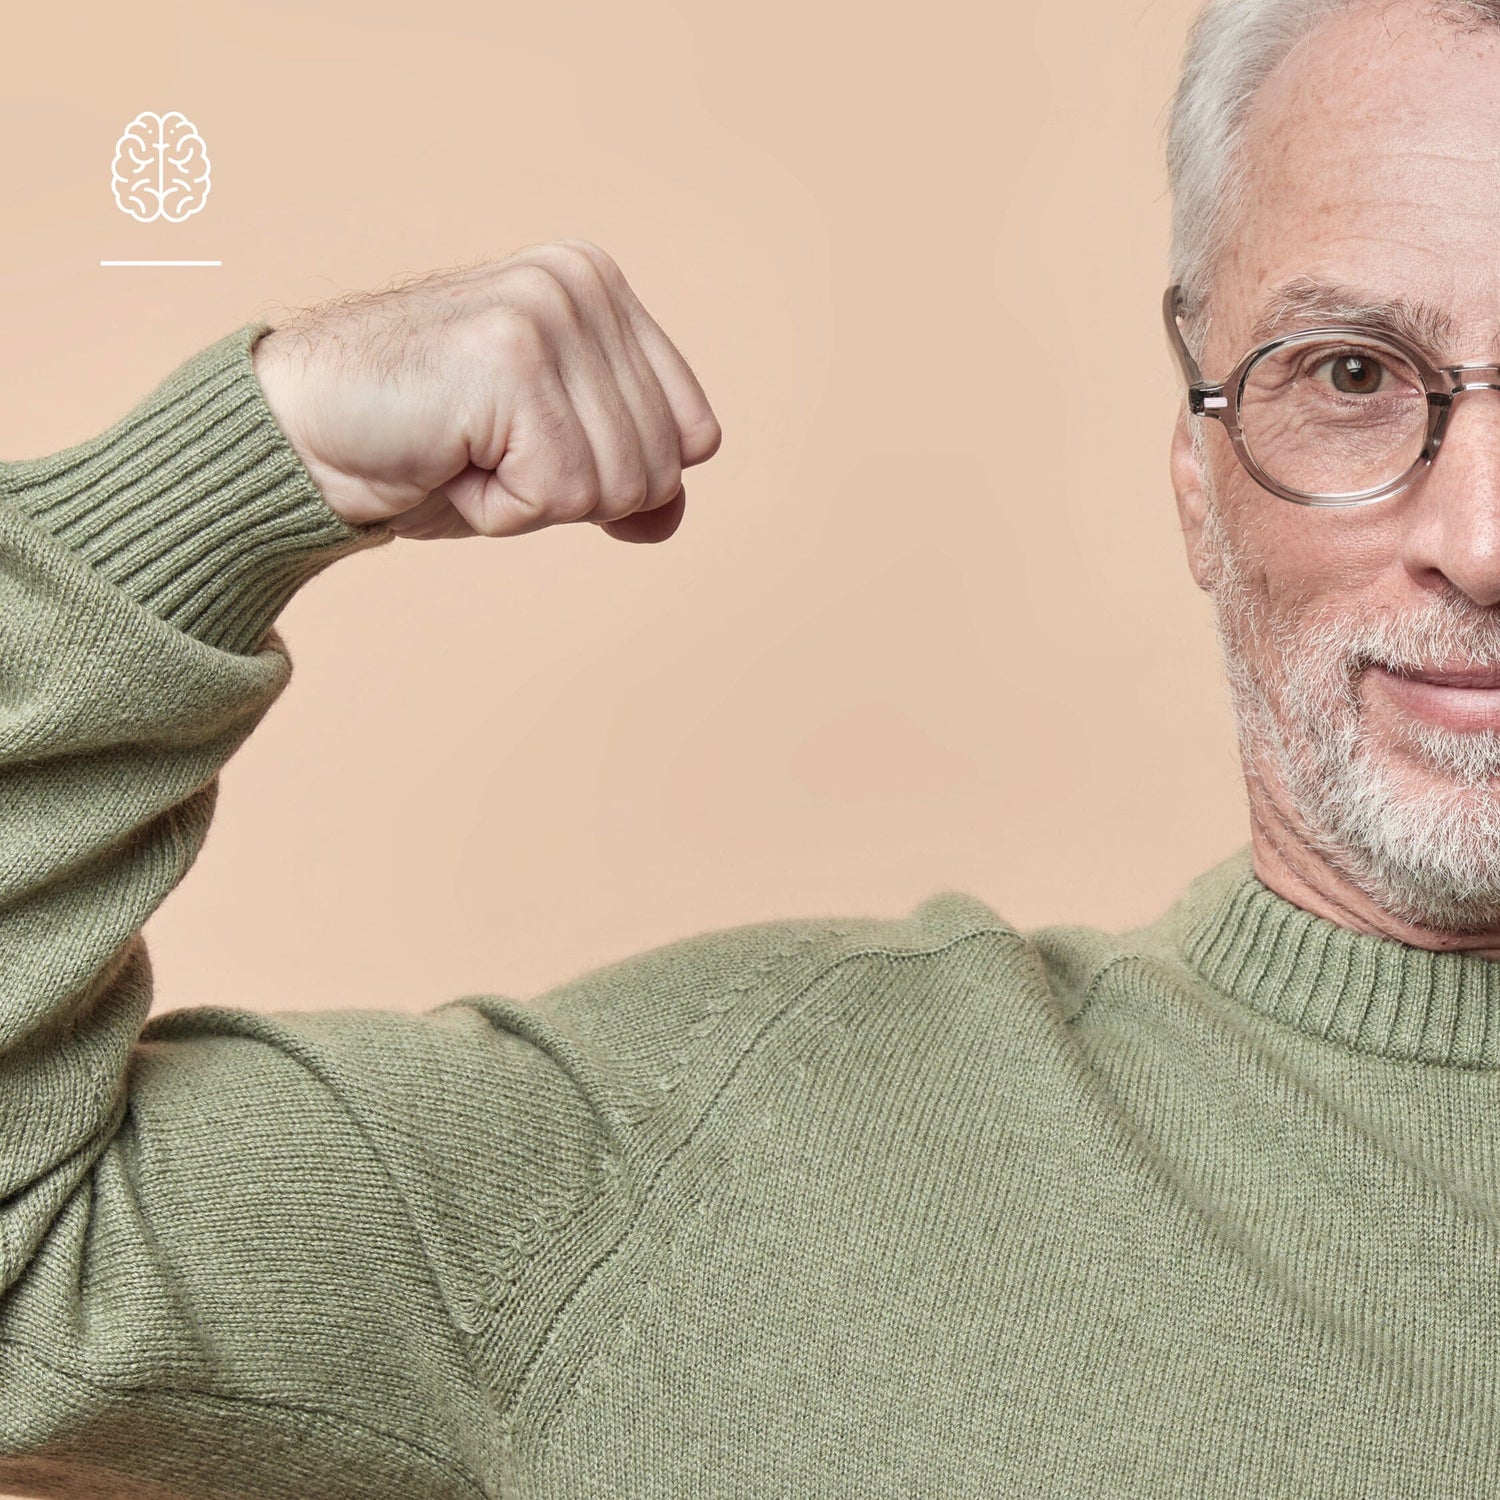 What happens to muscle mass as you age?